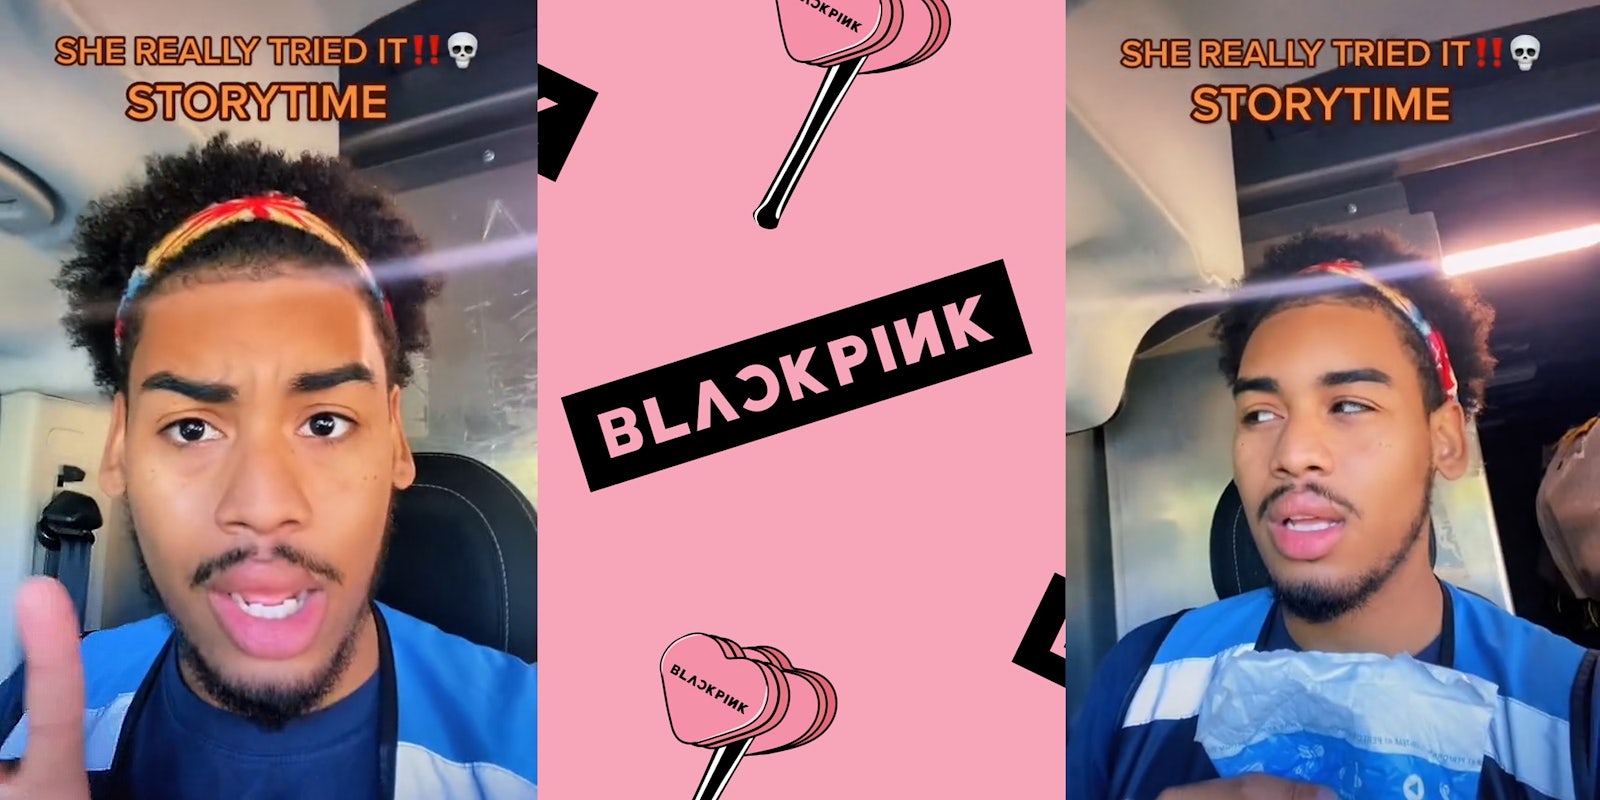 Amazon delivery driver finger up speaking in car caption 'SHE REALLY TRIED IT!! STORYTIME' (l) Blackpink kpop pattern Blackpink logo with lollipops pink (c) Amazon delivery driver making annoyed face speaking caption 'SHE REALLY TRIED IT!! STORYTIME' (r)